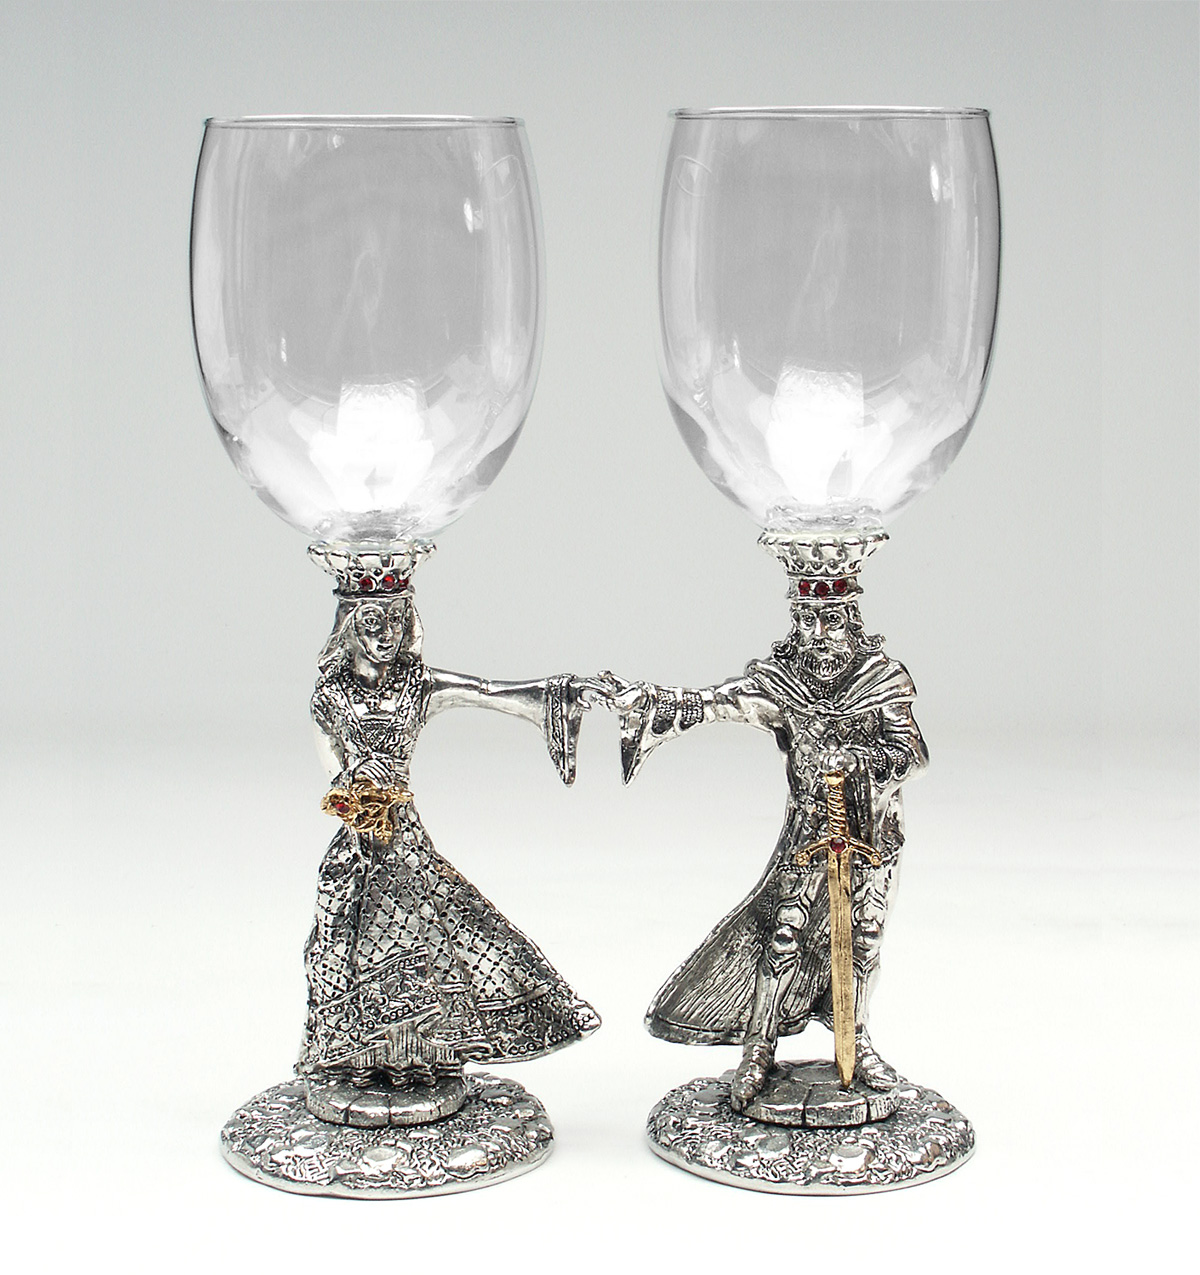 Clear wine glasses with Arthur and Guinevere stems, Austrian crystals, and 23k gold accents